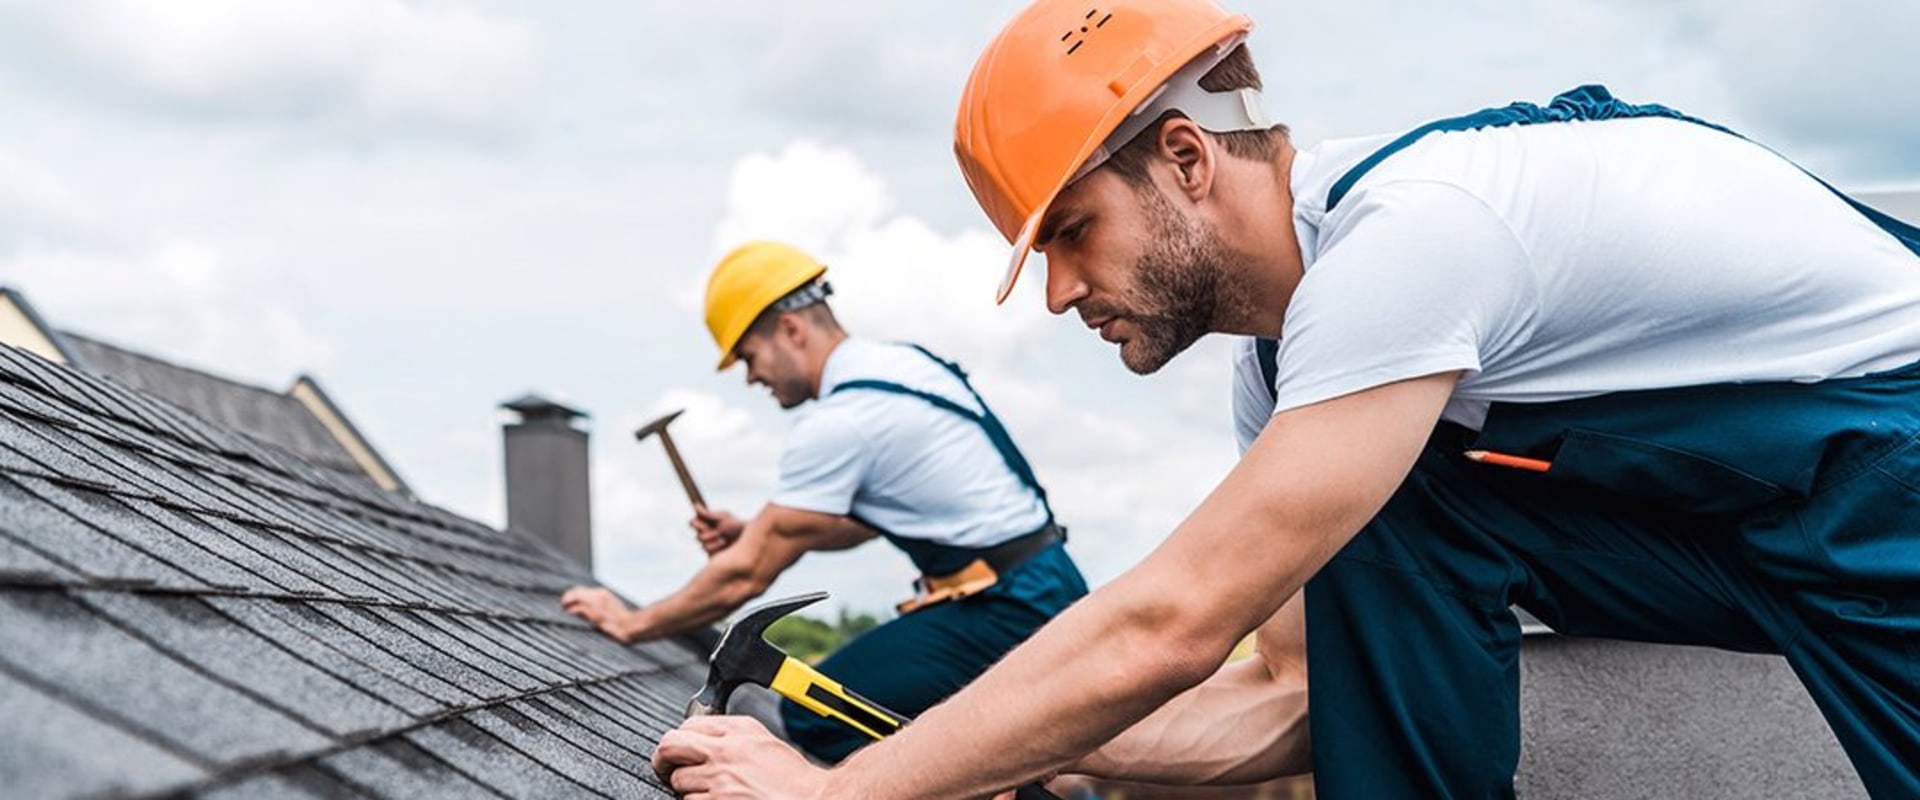 Durham Roof Inspection And Maintenance: Ensuring Your Home Remodel Is Built To Last